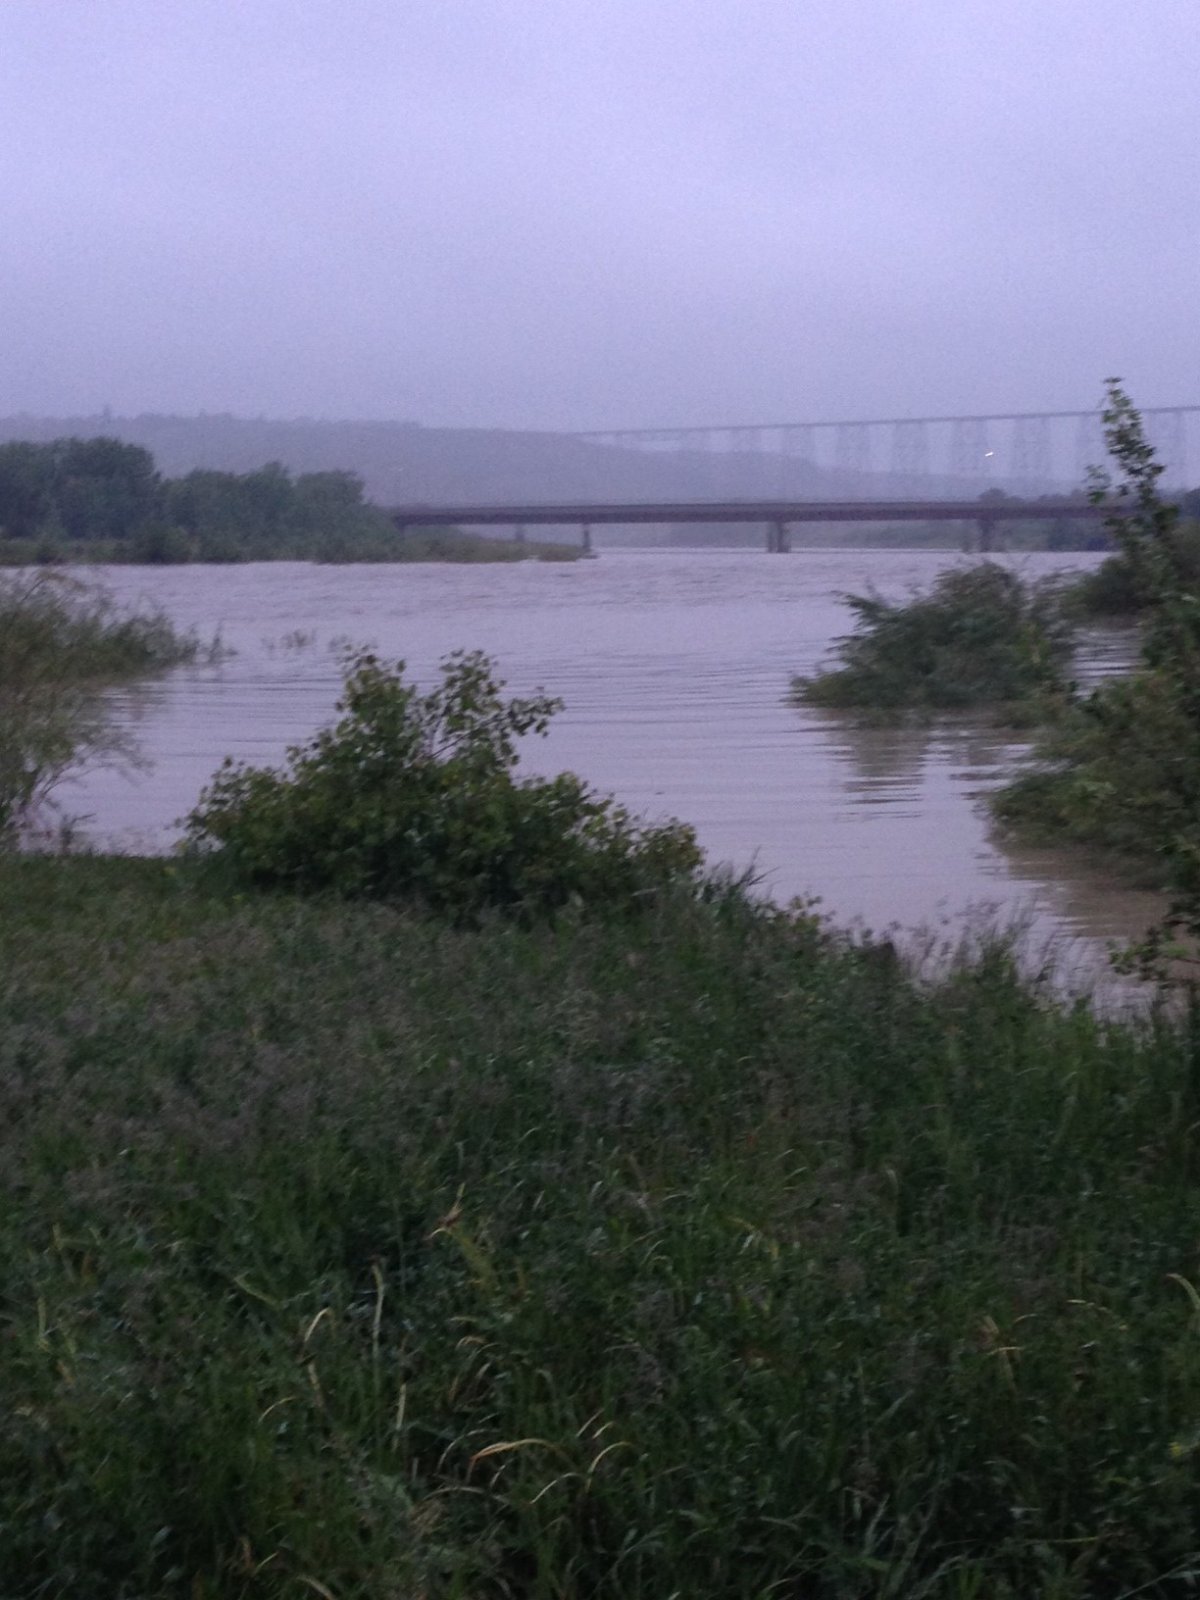 High water levels on the Old Man River in the Lethbridge river valley. June 18, 2014.